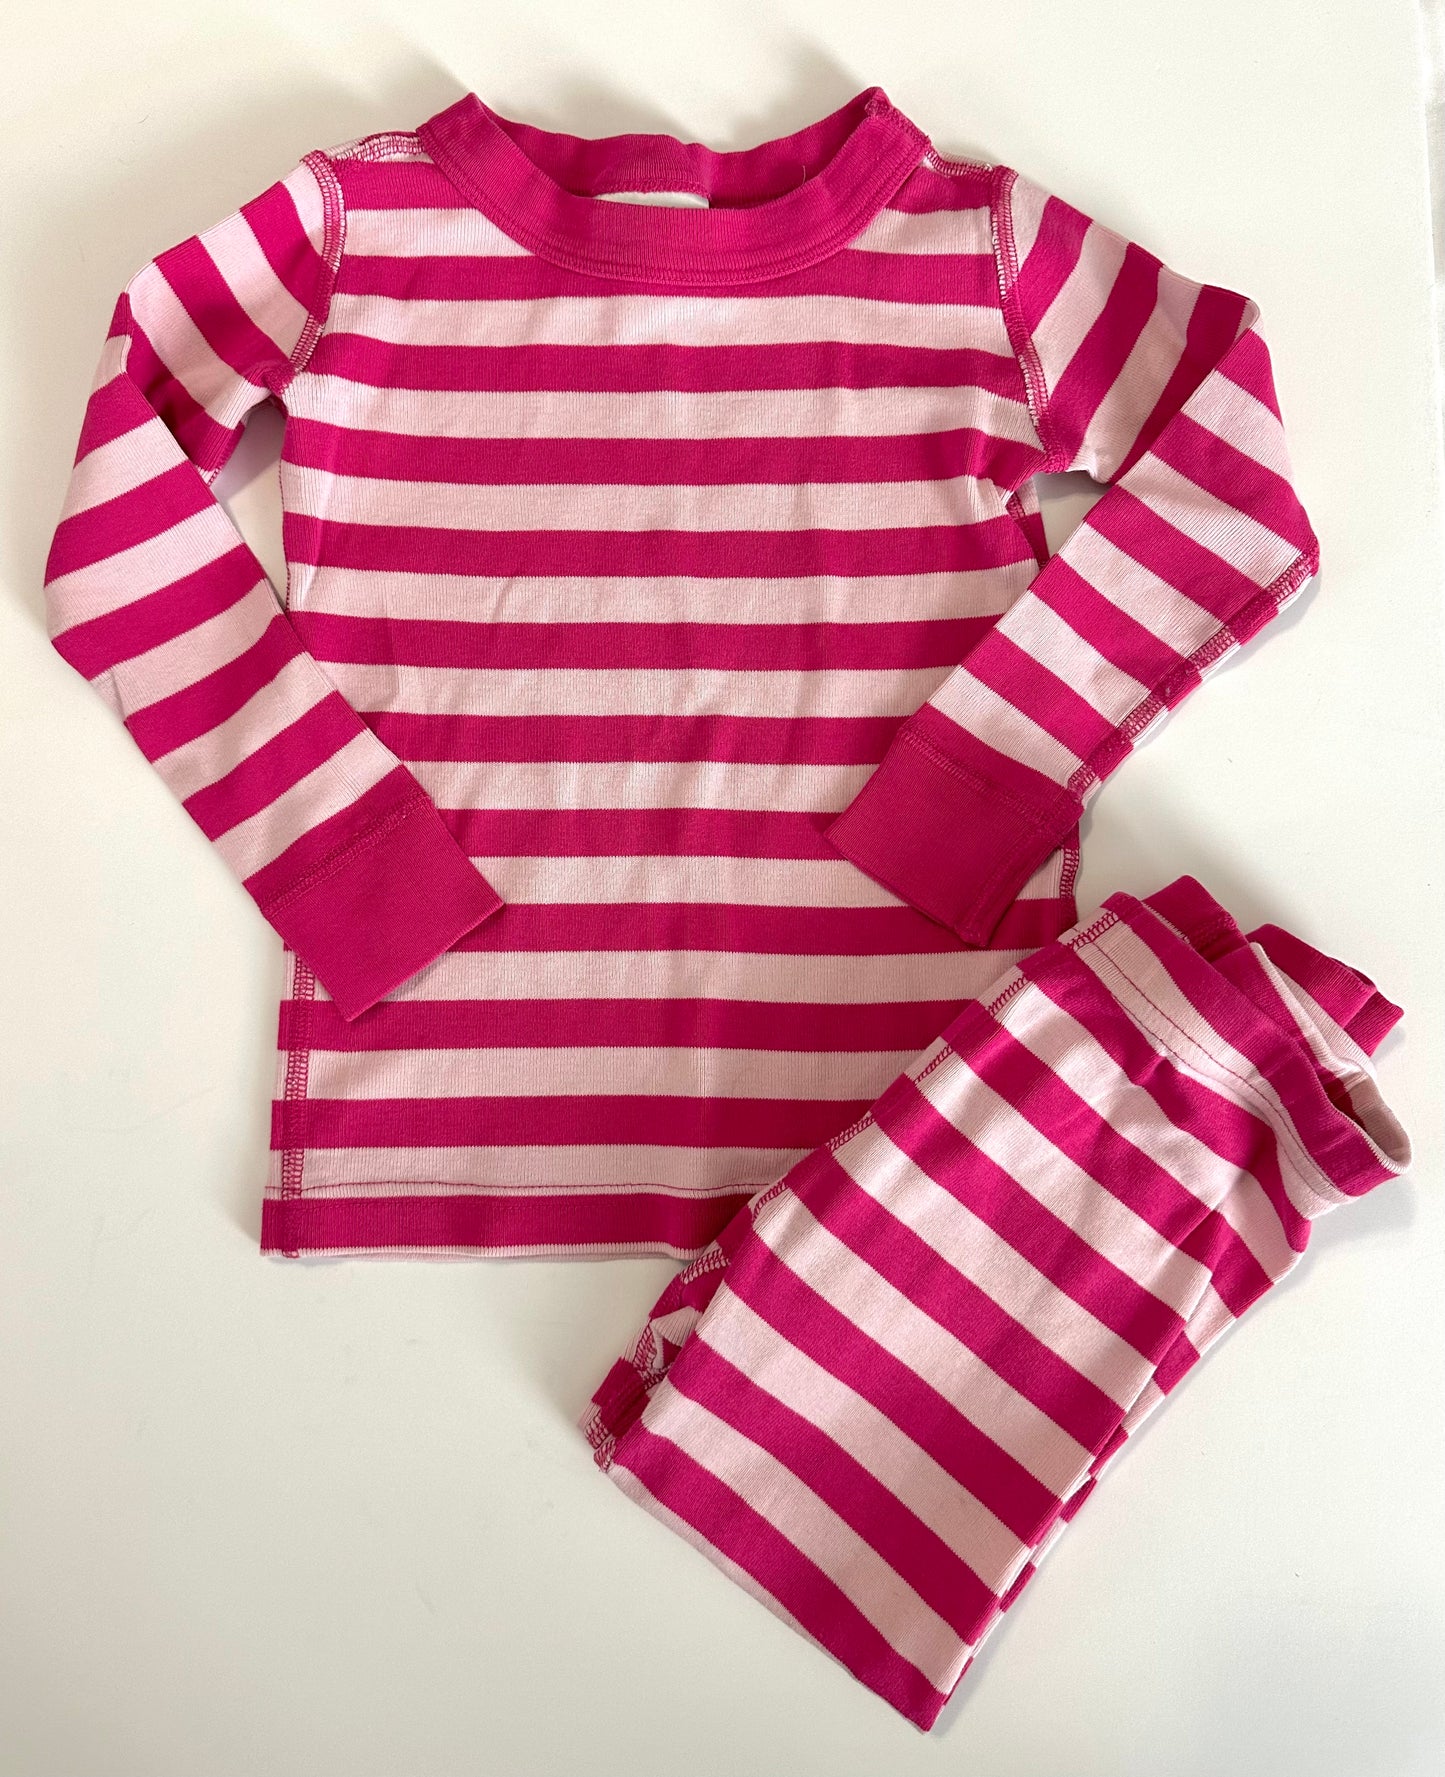 Hanna Andersson girl striped pajamas 90 / 3T